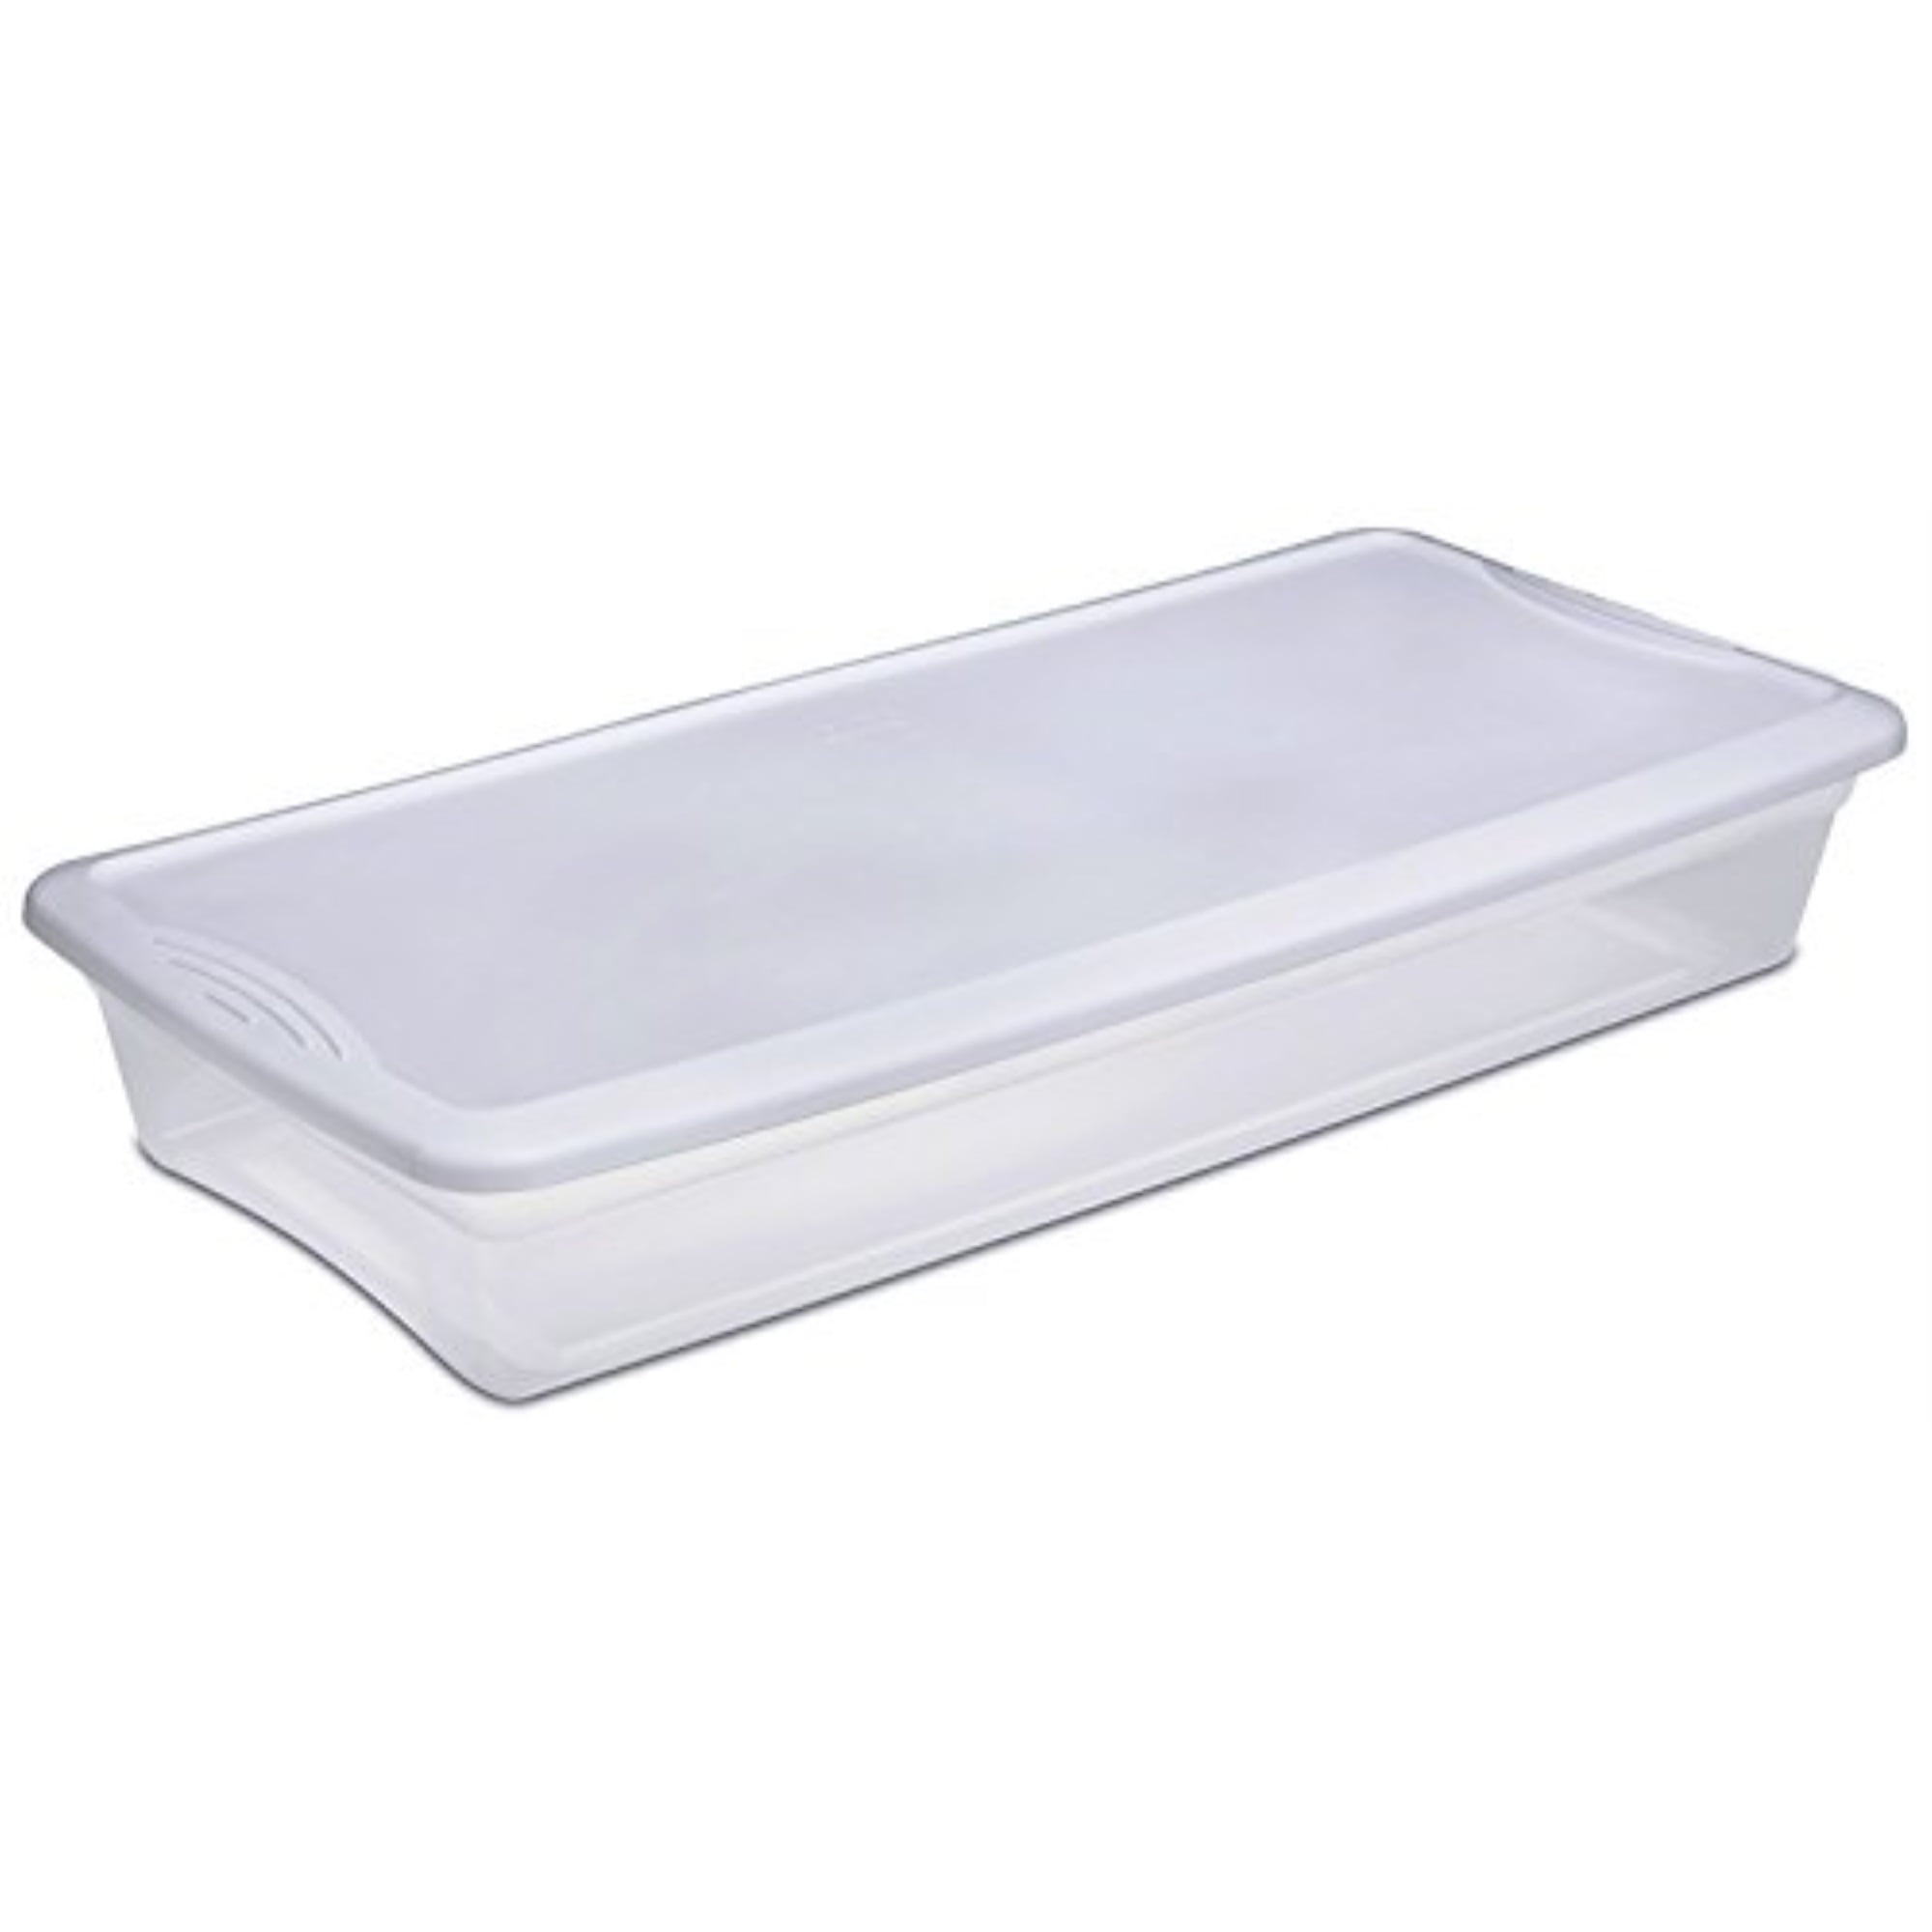 Under Bed Storage Container 52Q Latch Box White Lid Handles Organize Clothing 